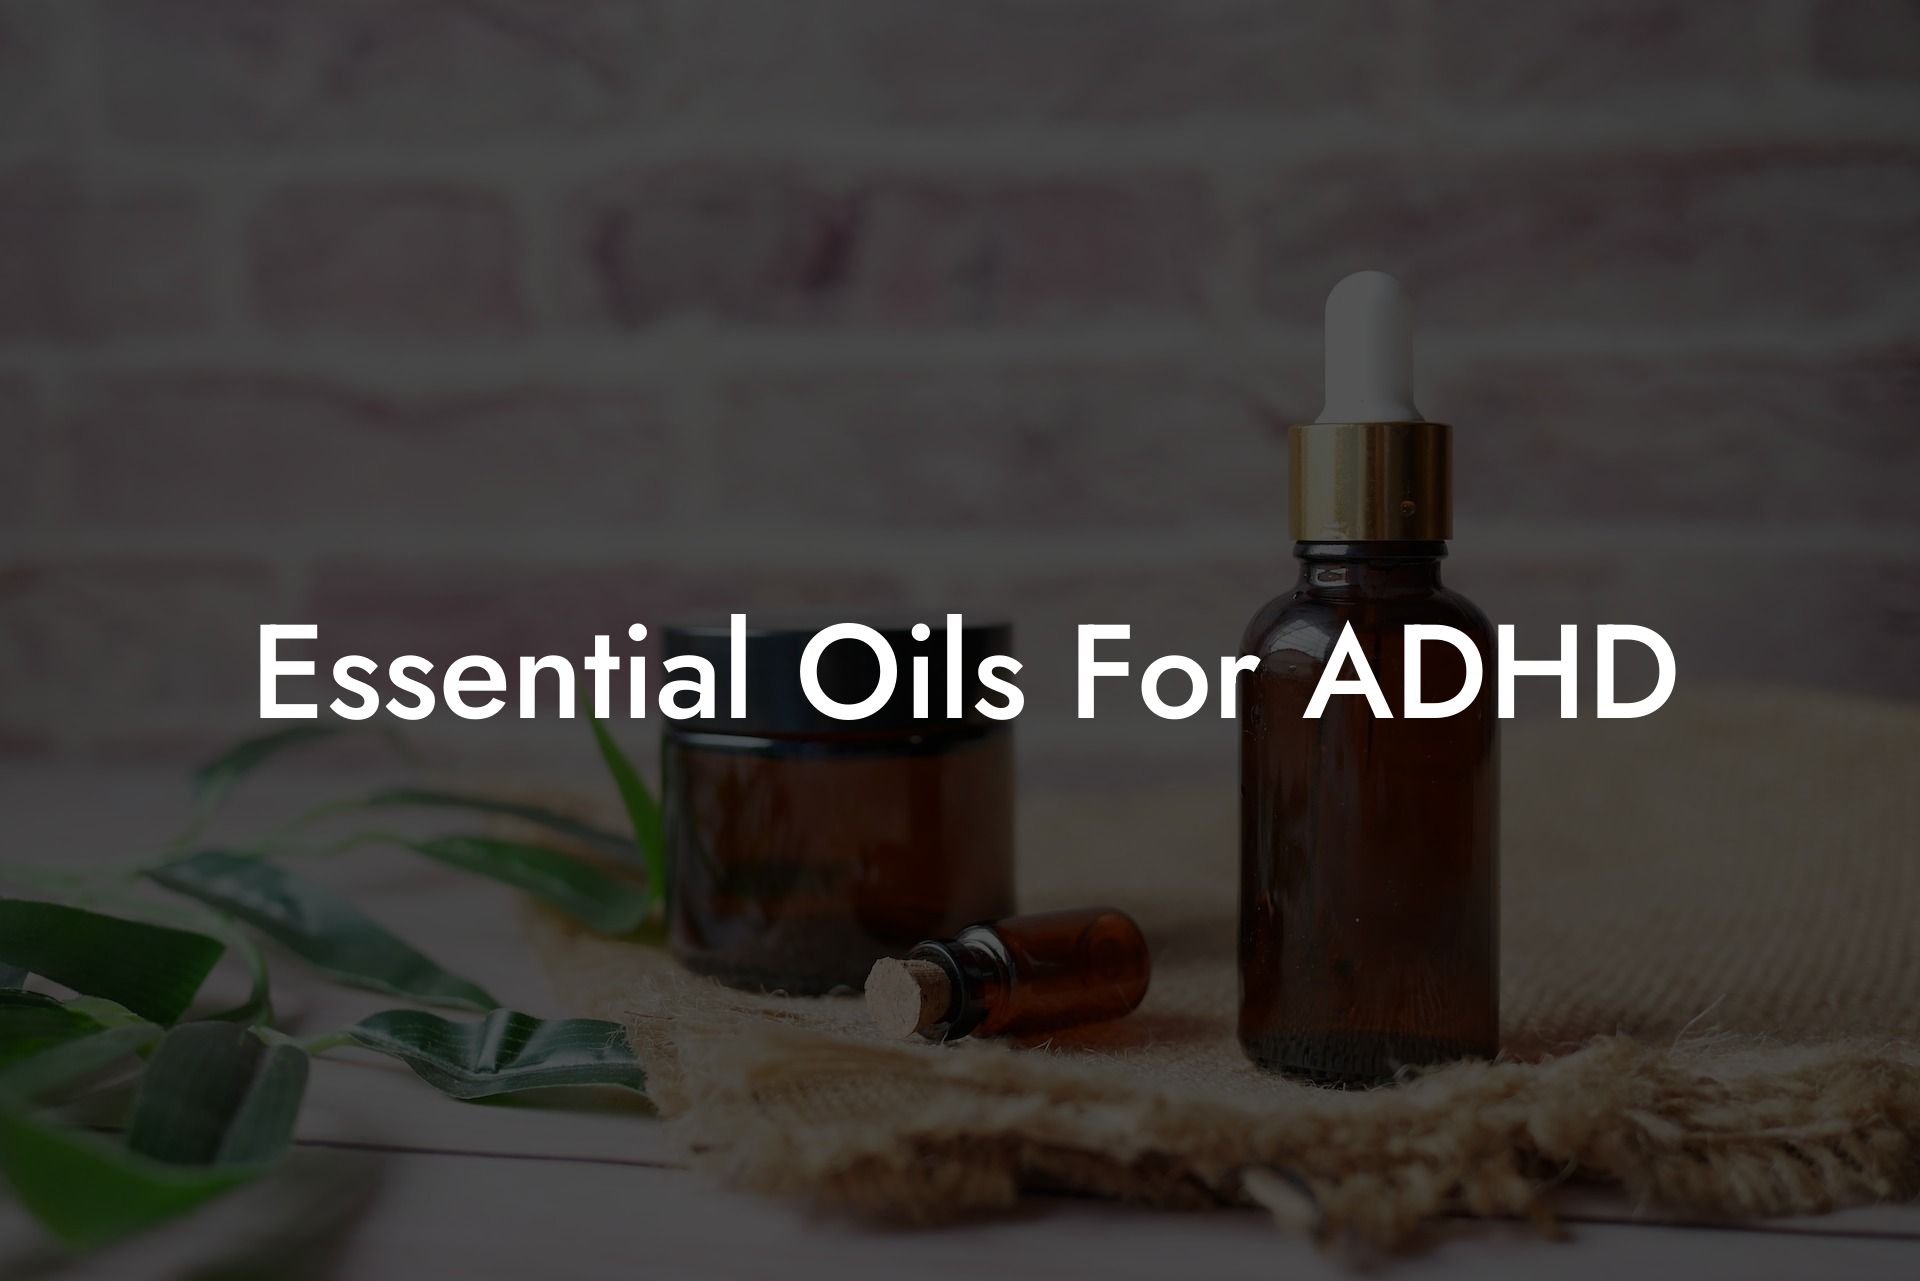 Essential Oils For ADHD